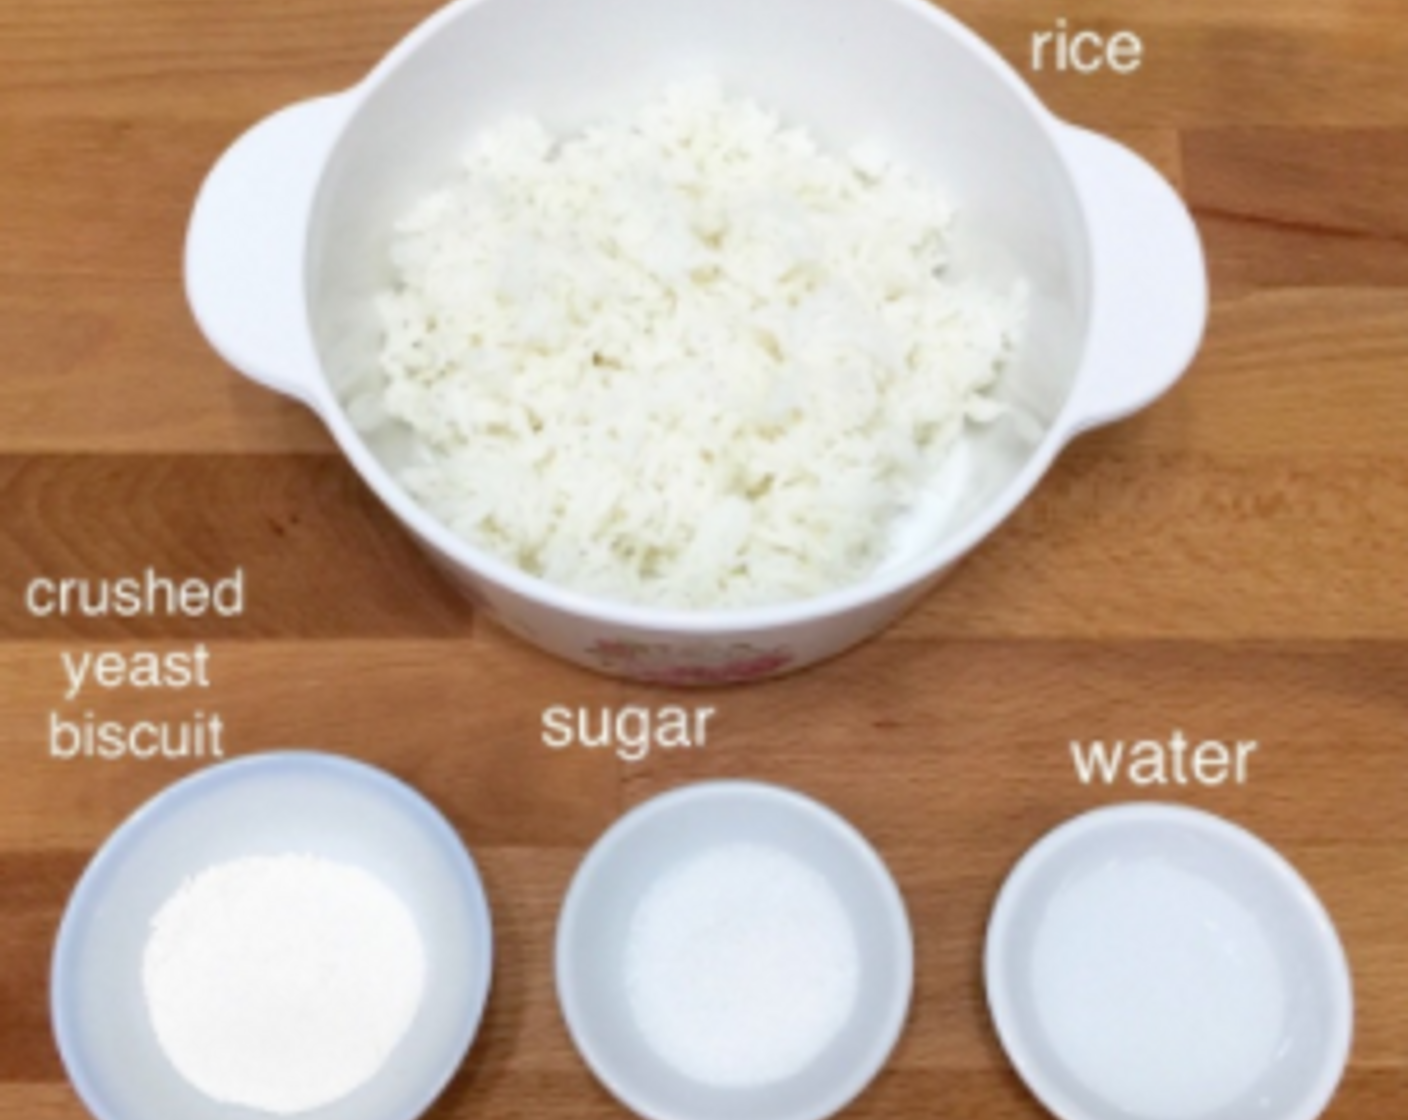 step 2 Place cooked White Rice (1/2 cup) to cool in a casserole and prepare other ingredients needed to ferment the rice.